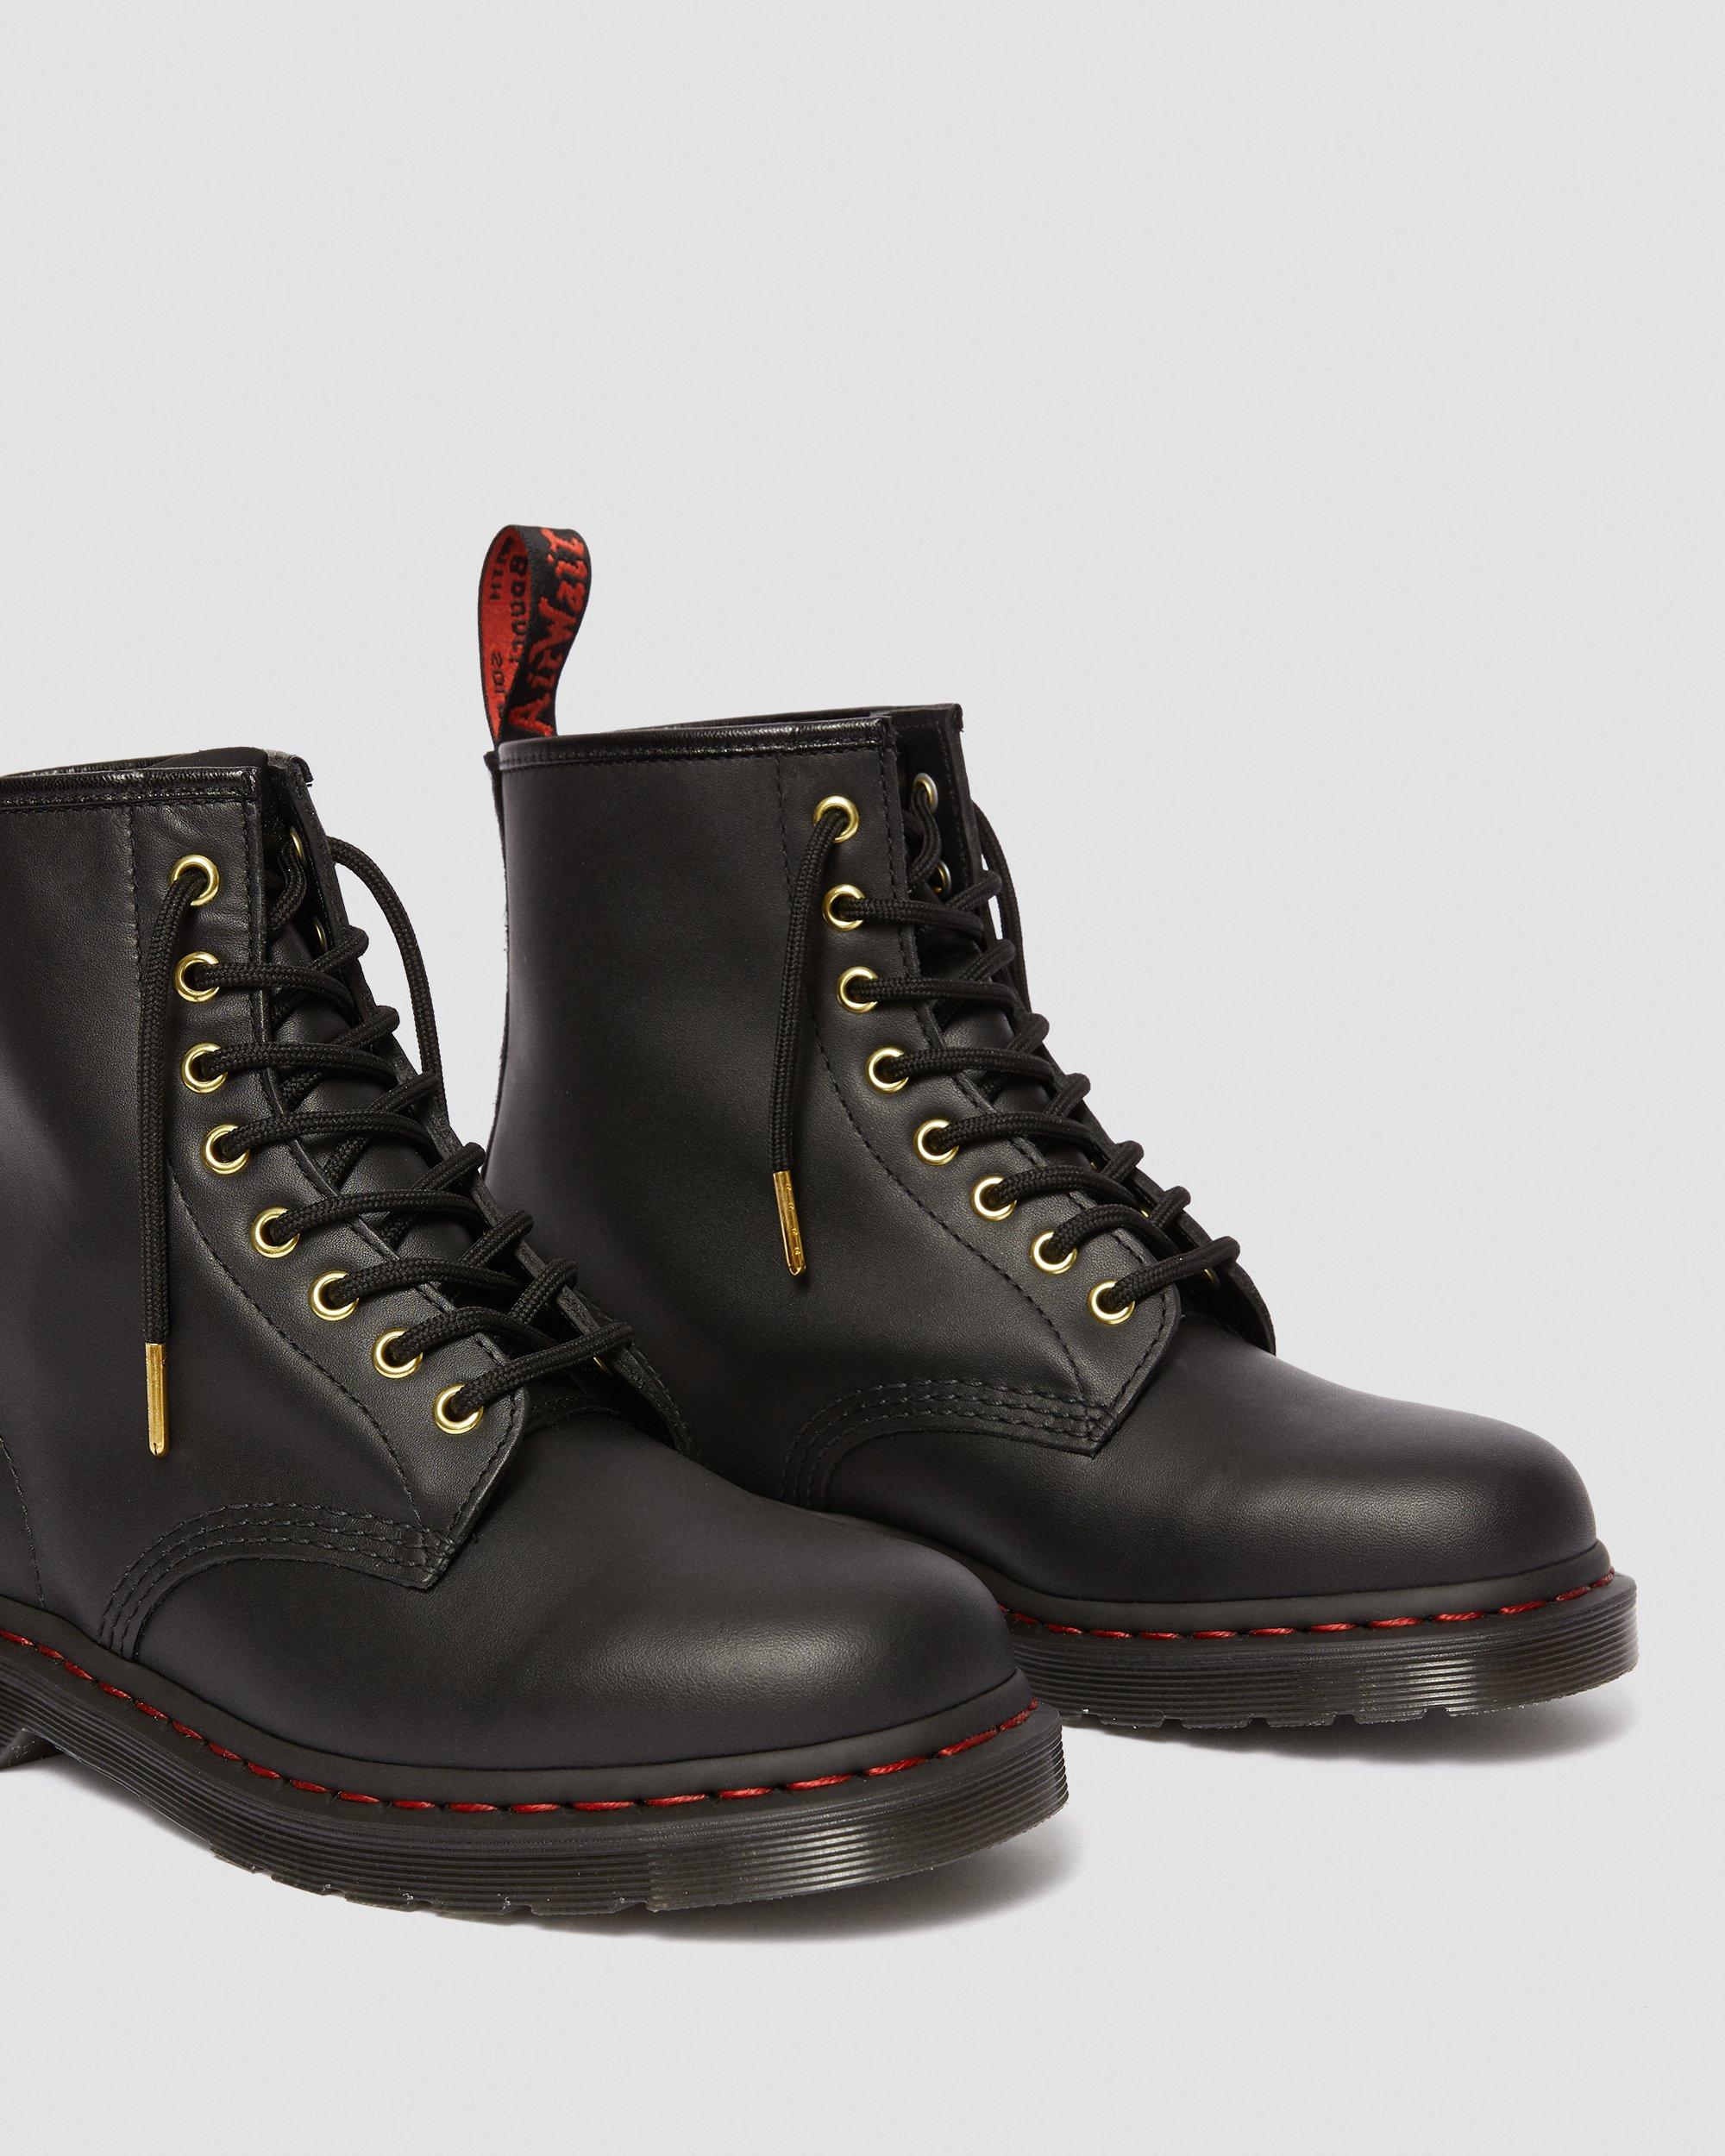 STIVALETTI DI PELLE 1460 CHINESE NEW YEAR Dr. Martens